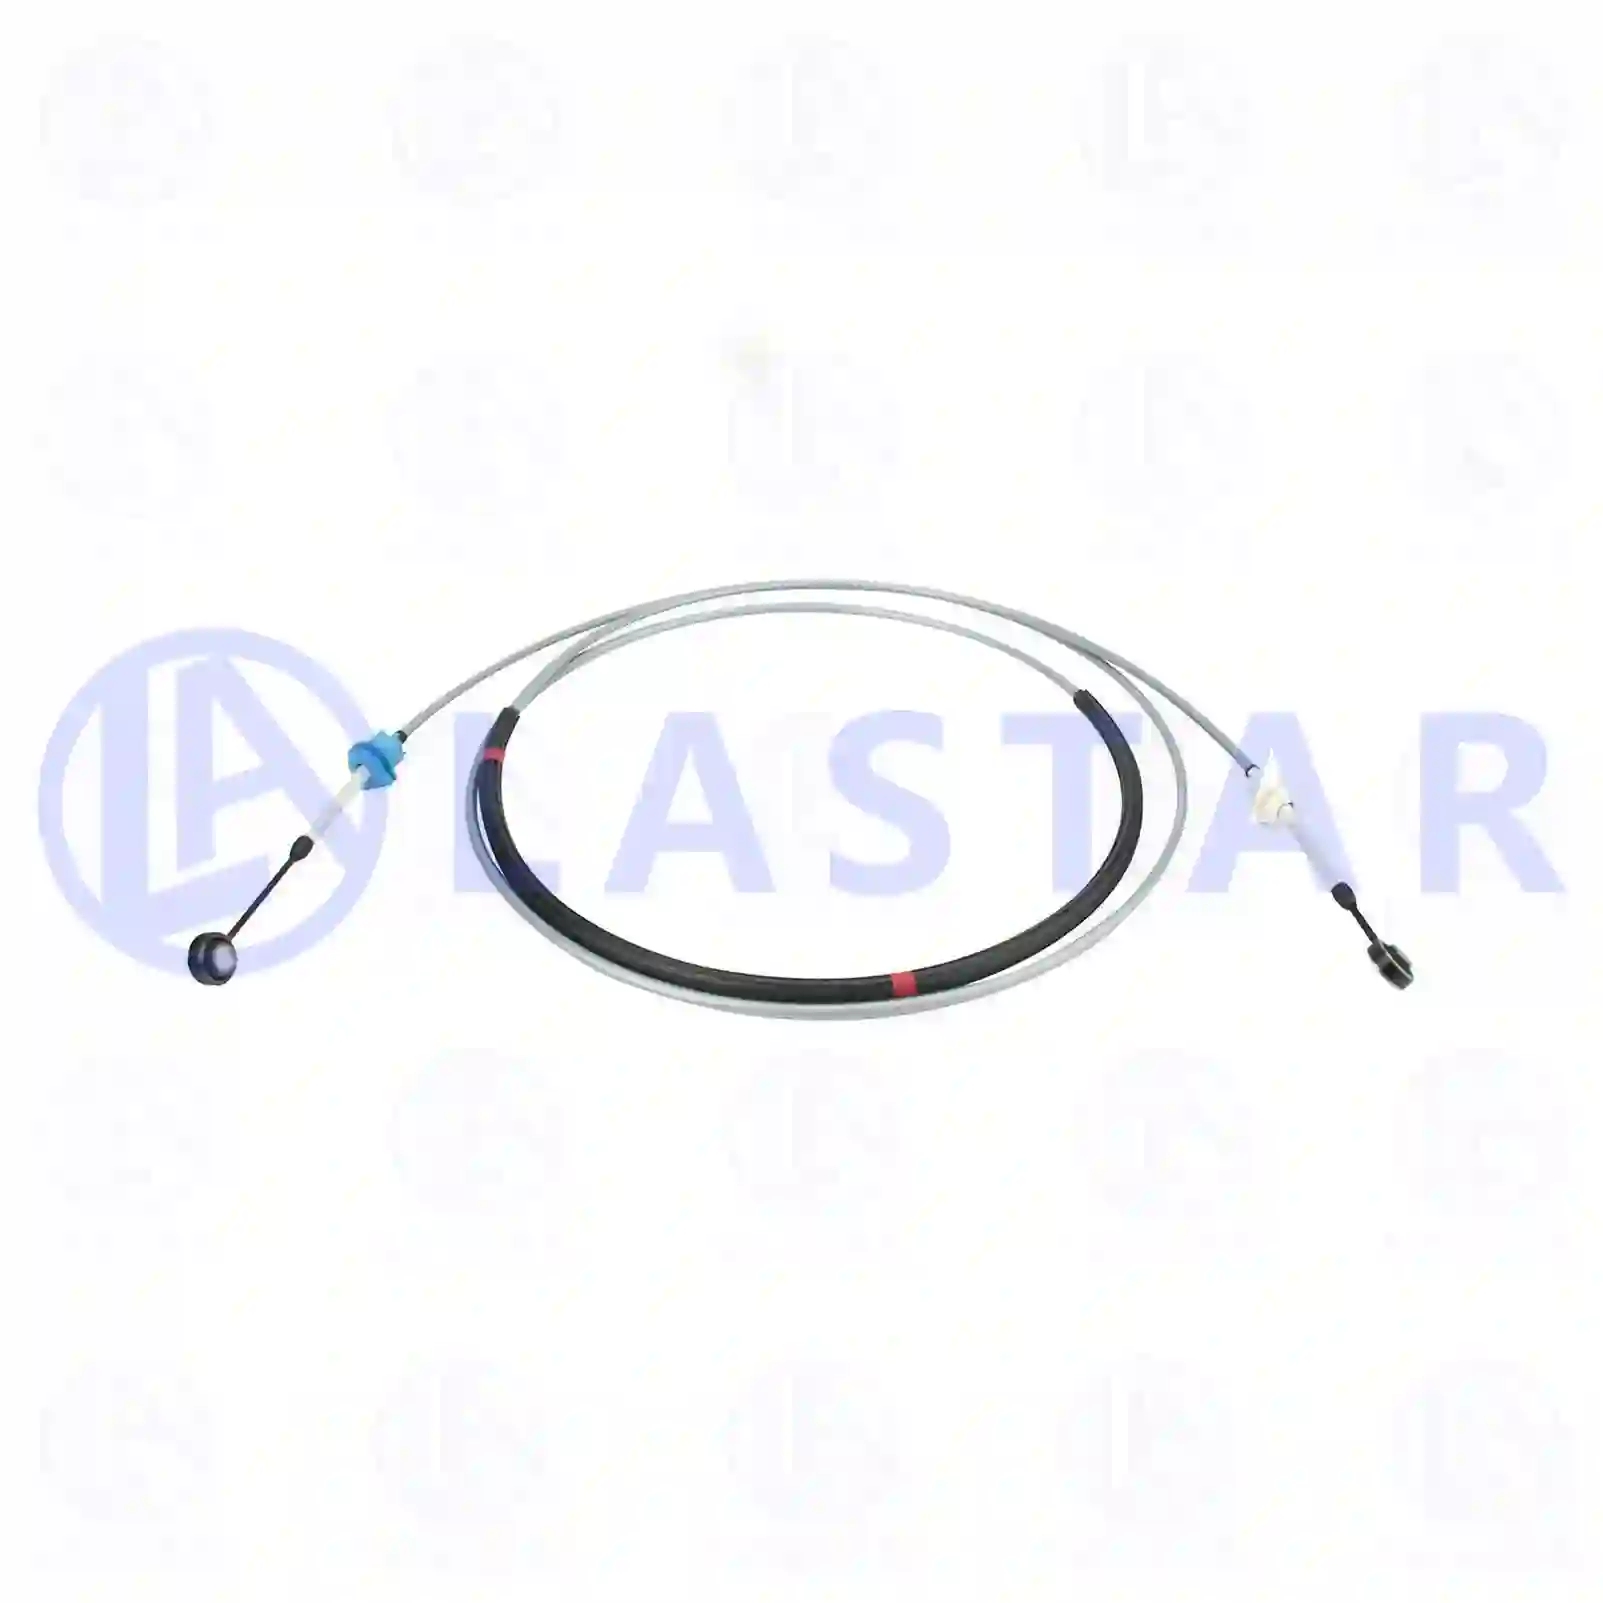 Control cable, switching, 77732240, 20545995, 20700995, 21002895, 21343595, 21789729, ZG21342-0008 ||  77732240 Lastar Spare Part | Truck Spare Parts, Auotomotive Spare Parts Control cable, switching, 77732240, 20545995, 20700995, 21002895, 21343595, 21789729, ZG21342-0008 ||  77732240 Lastar Spare Part | Truck Spare Parts, Auotomotive Spare Parts